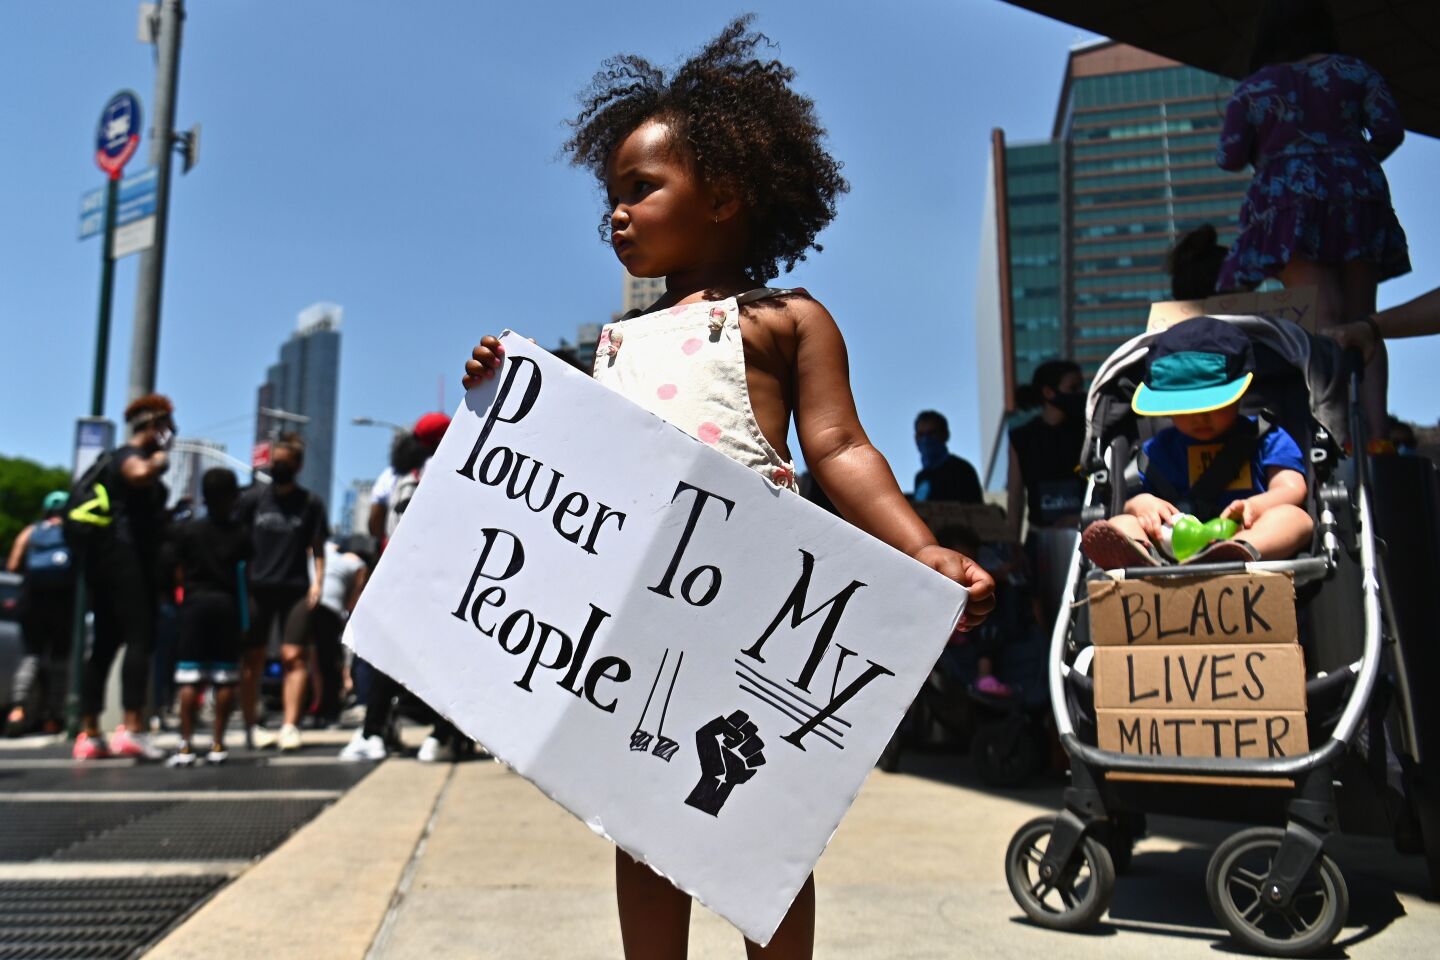 A children's march in solidarity with the Black Lives Matter movement in New York City